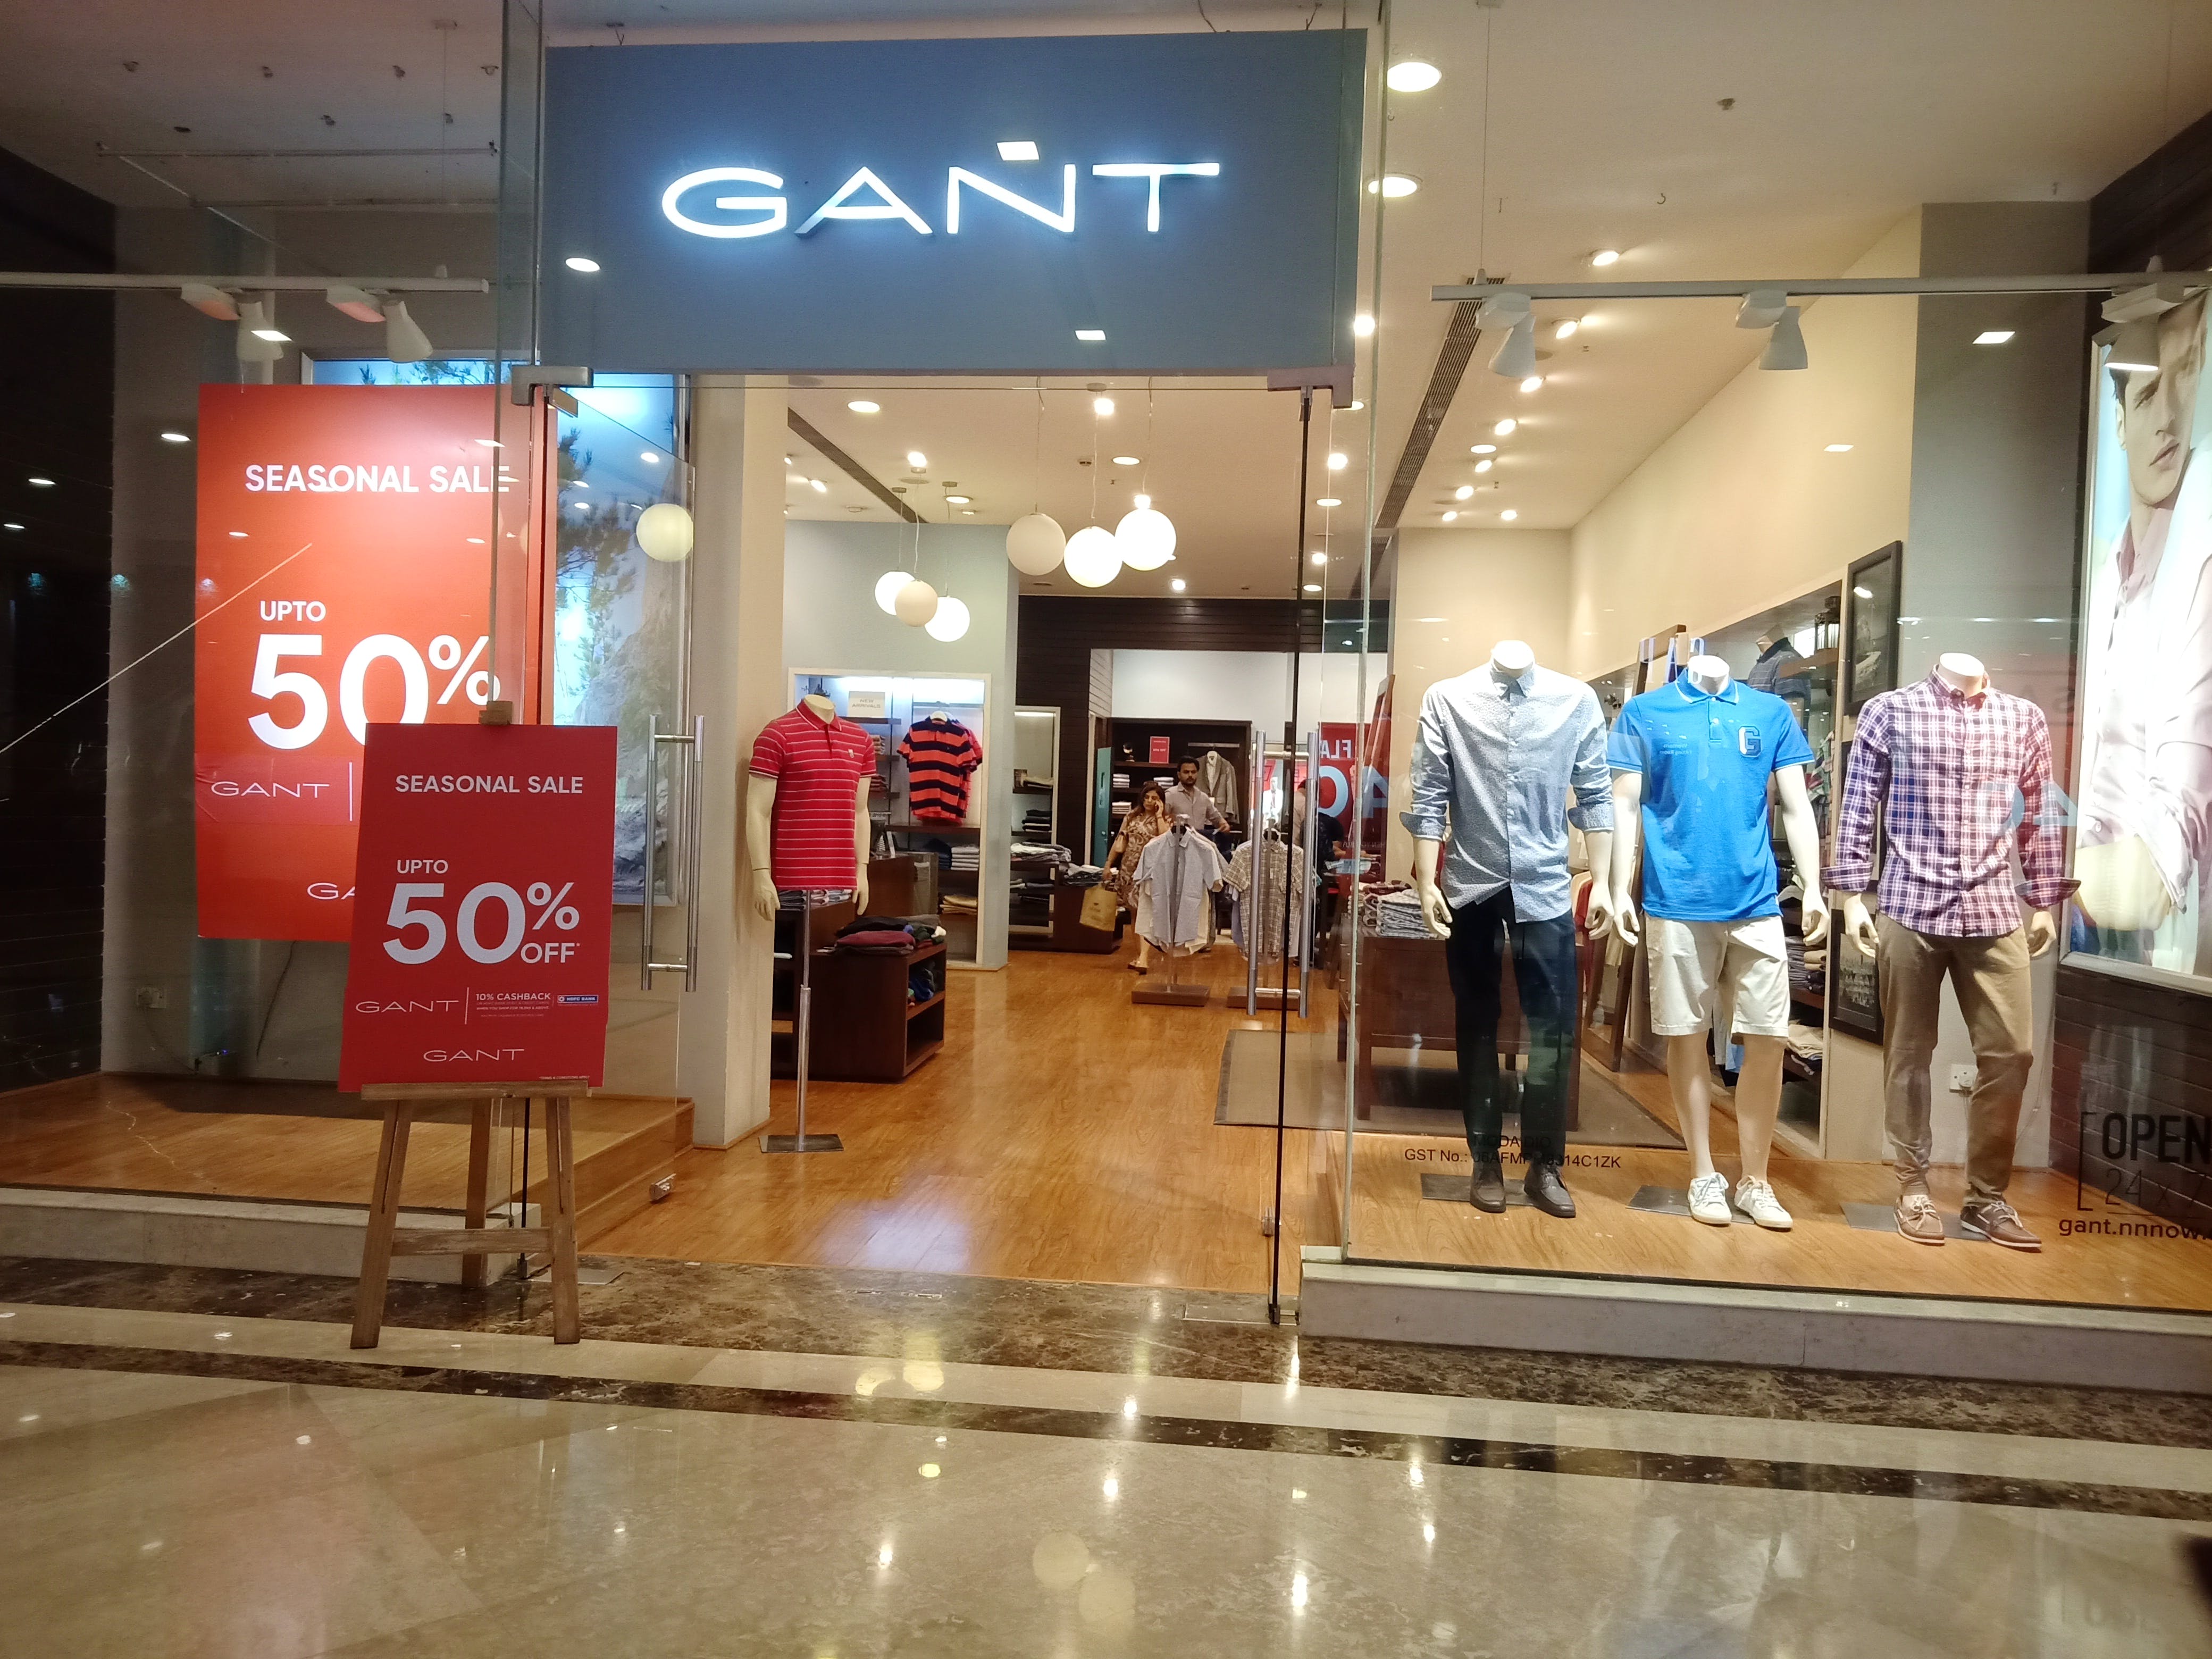 Outlet store,Shopping mall,Boutique,Building,Retail,Fashion,Shopping,Display window,Interior design,Advertising